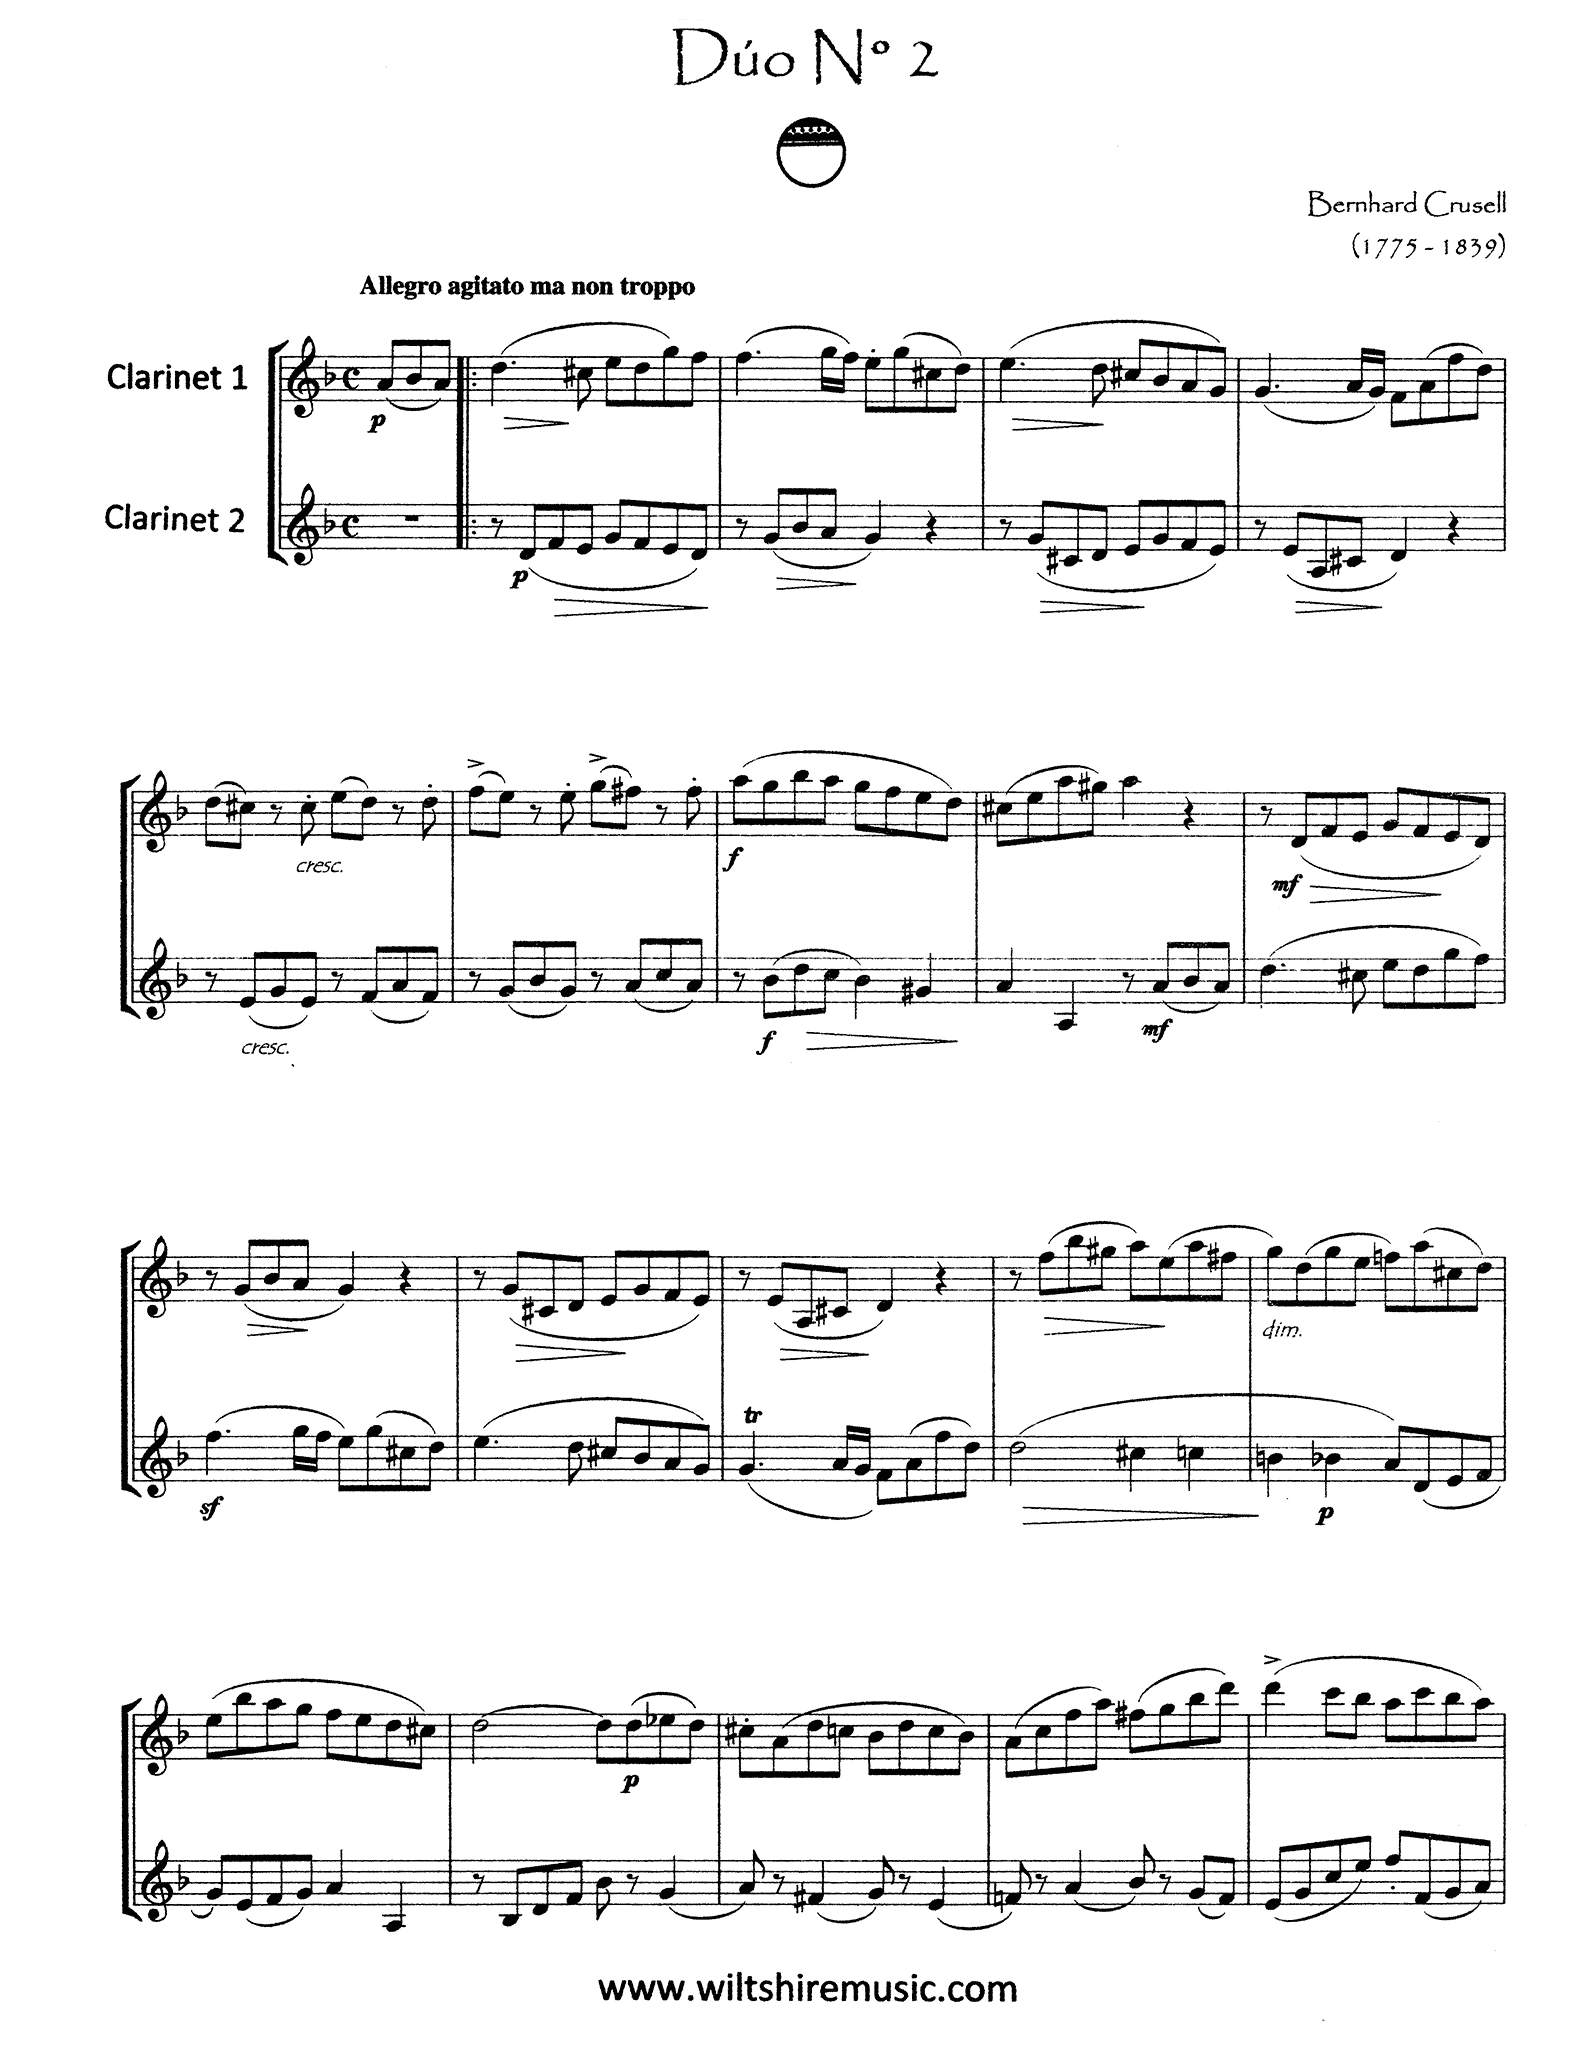 Crusell: Clarinet Duet No. 2 in D Minor: Movement 1 page 1